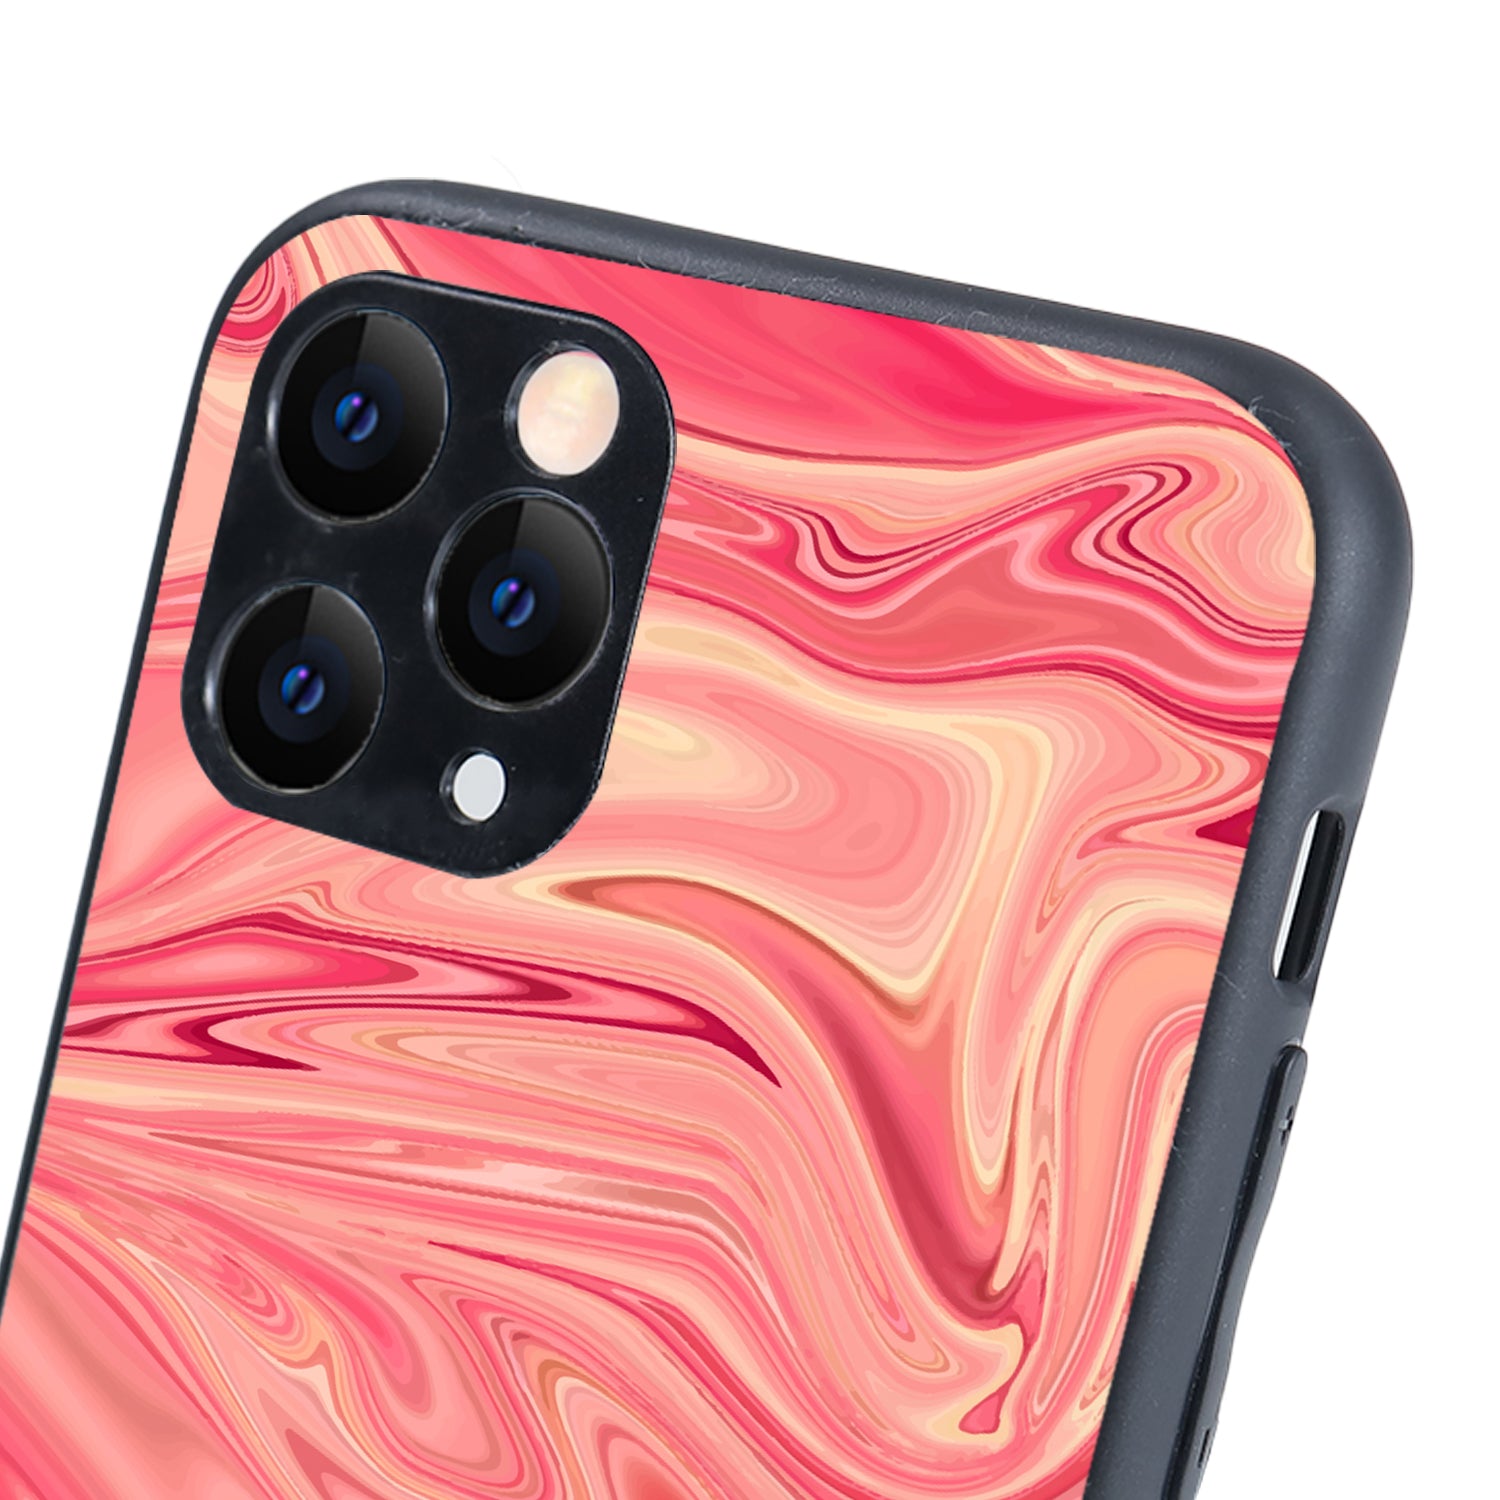 Pink Marble iPhone 11 Pro Case